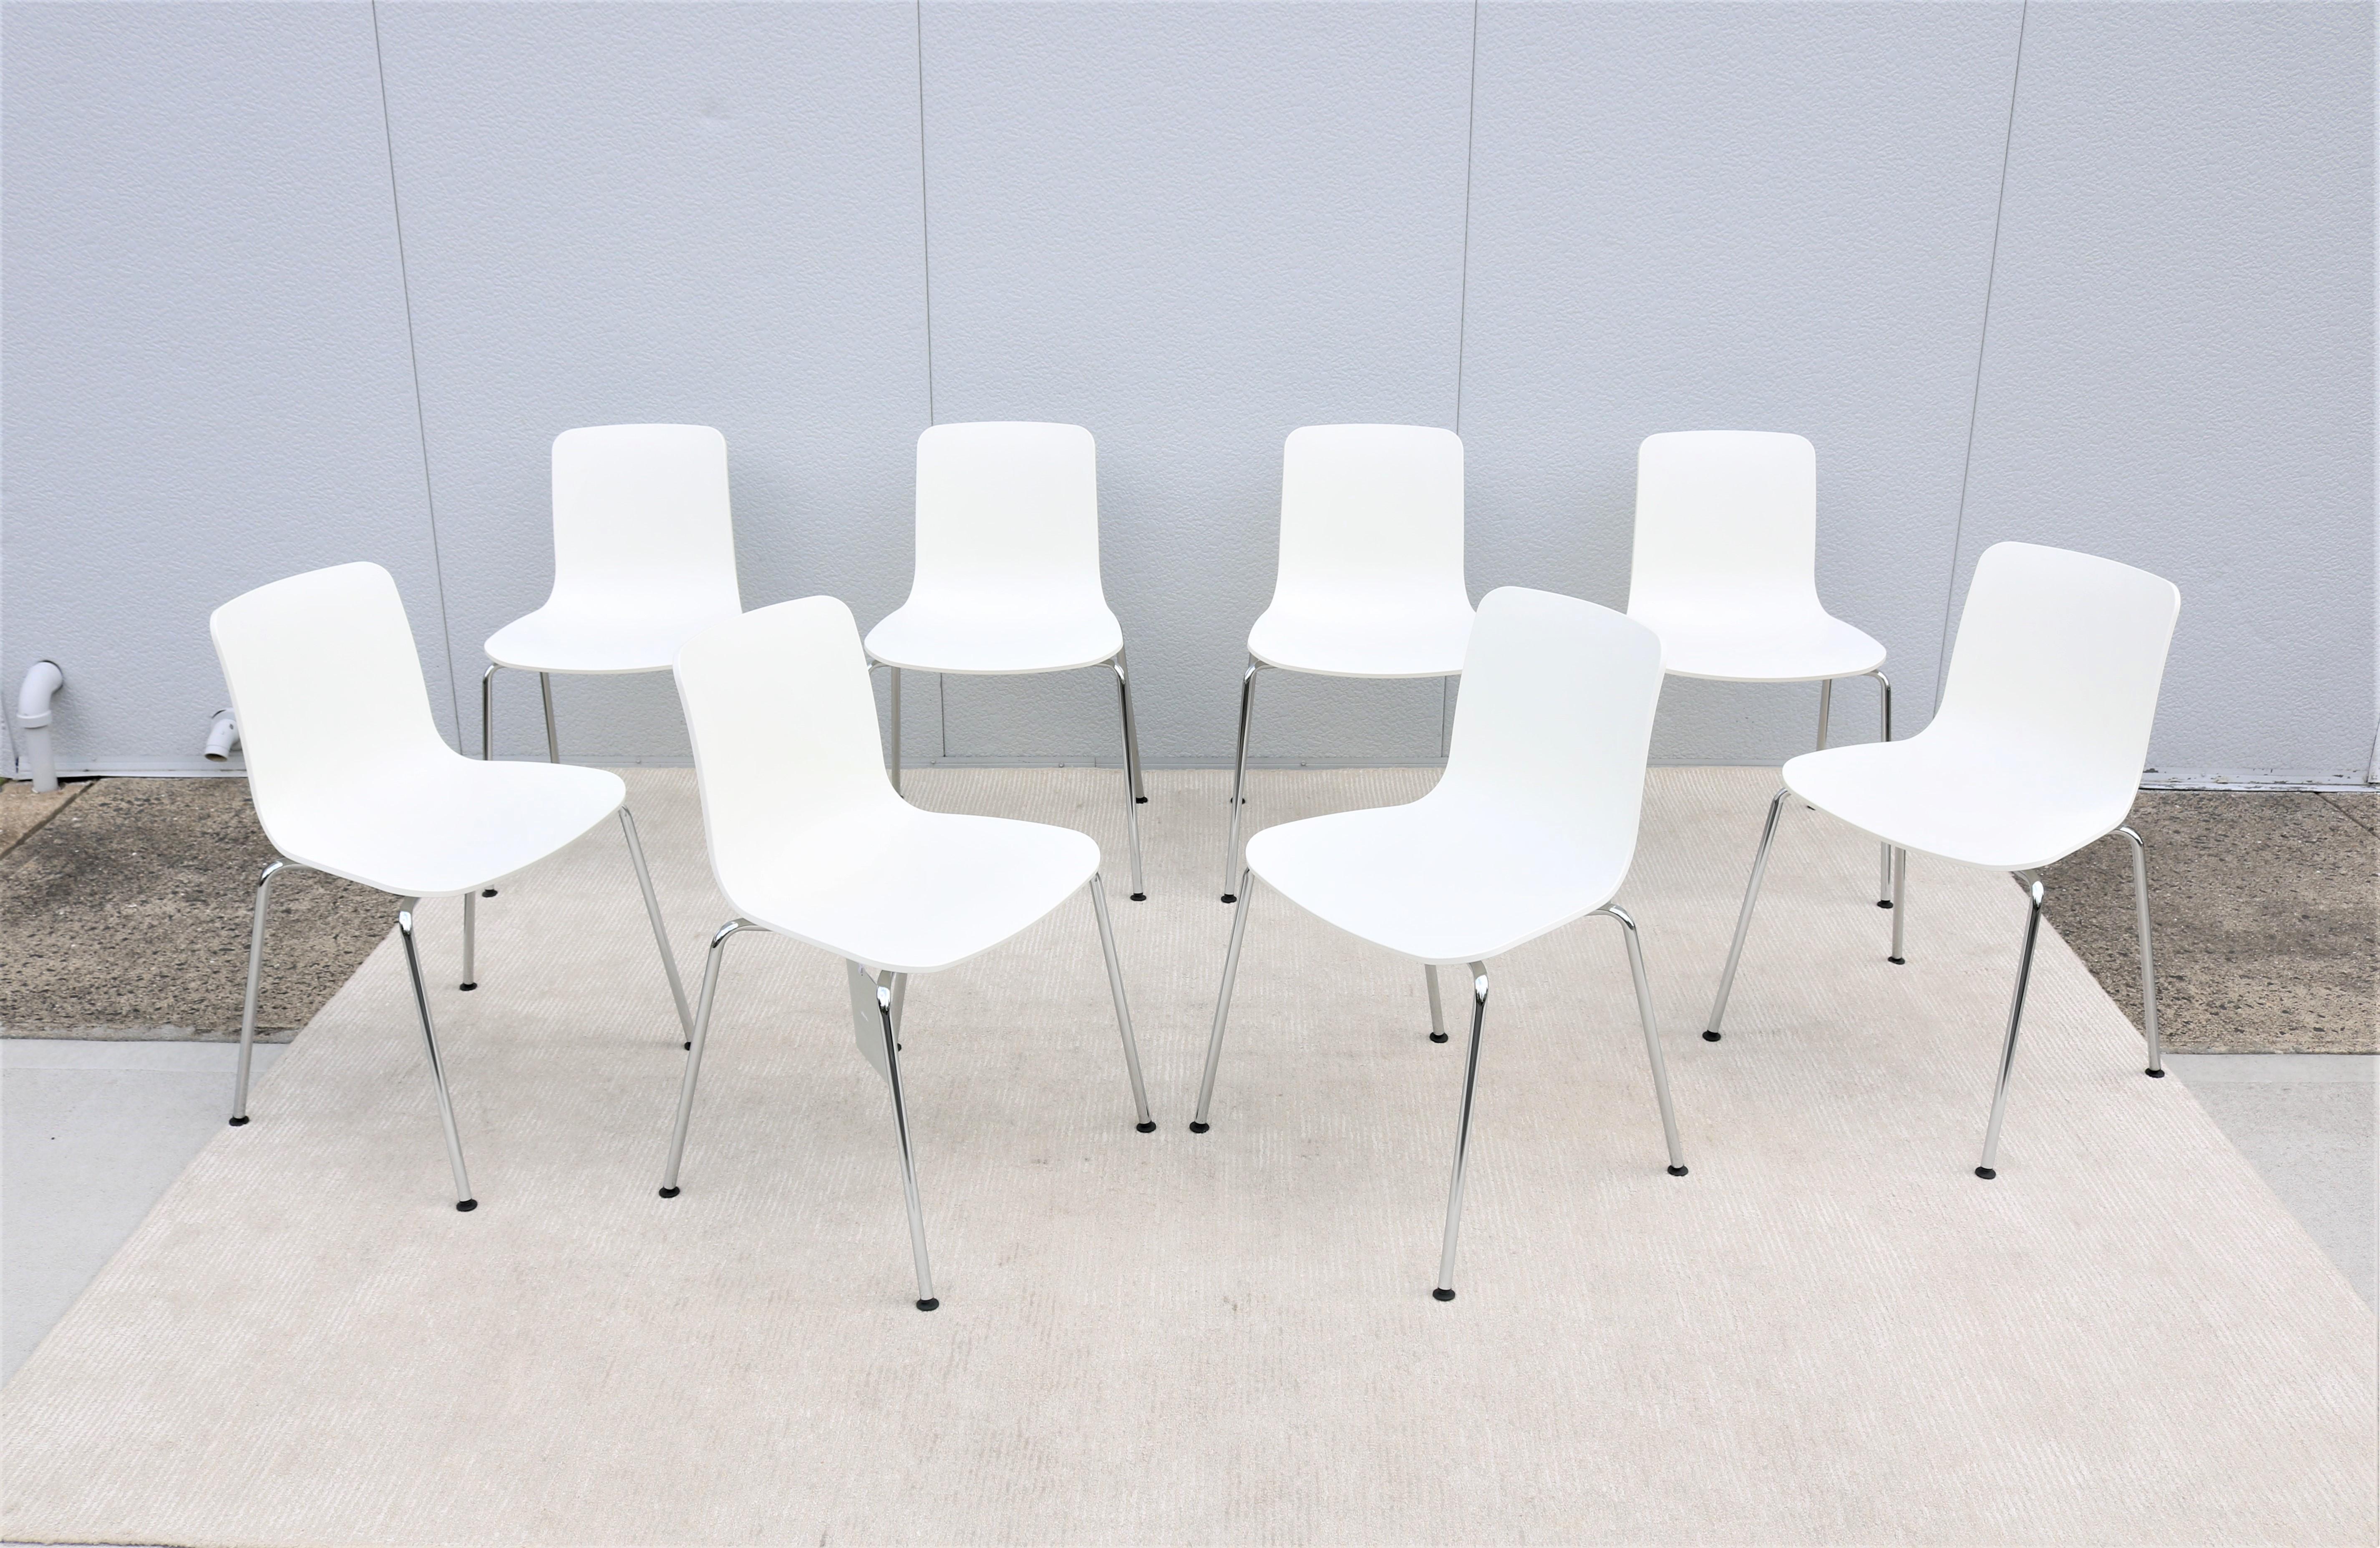 The HAL Tube stackable chair by Vitra is very sleek with clean contemporary look. 
The shape of the seat shell provides great freedom of movement in a variety of sitting positions.
The lightweight design and stacking feature make it suitable for